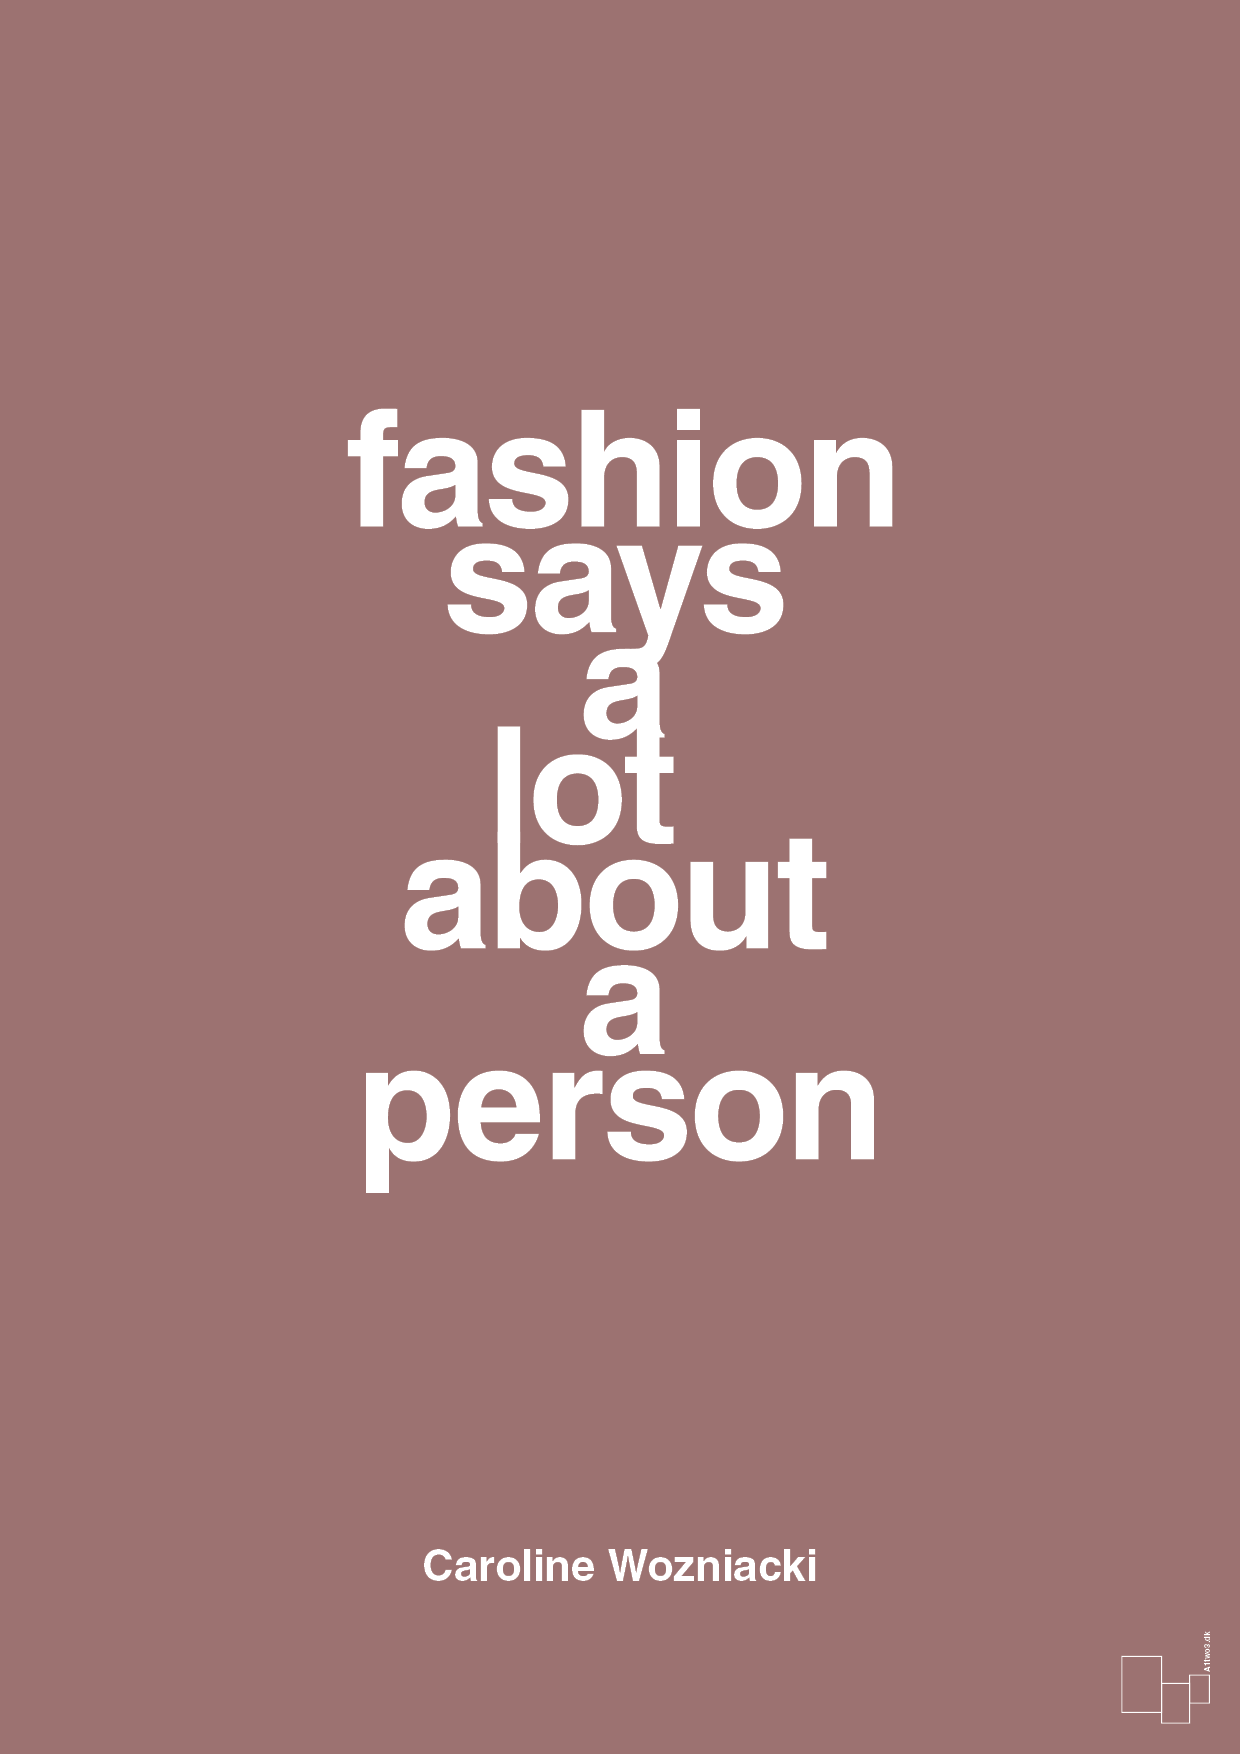 fashion says a lot about a person - Plakat med Citater i Plum